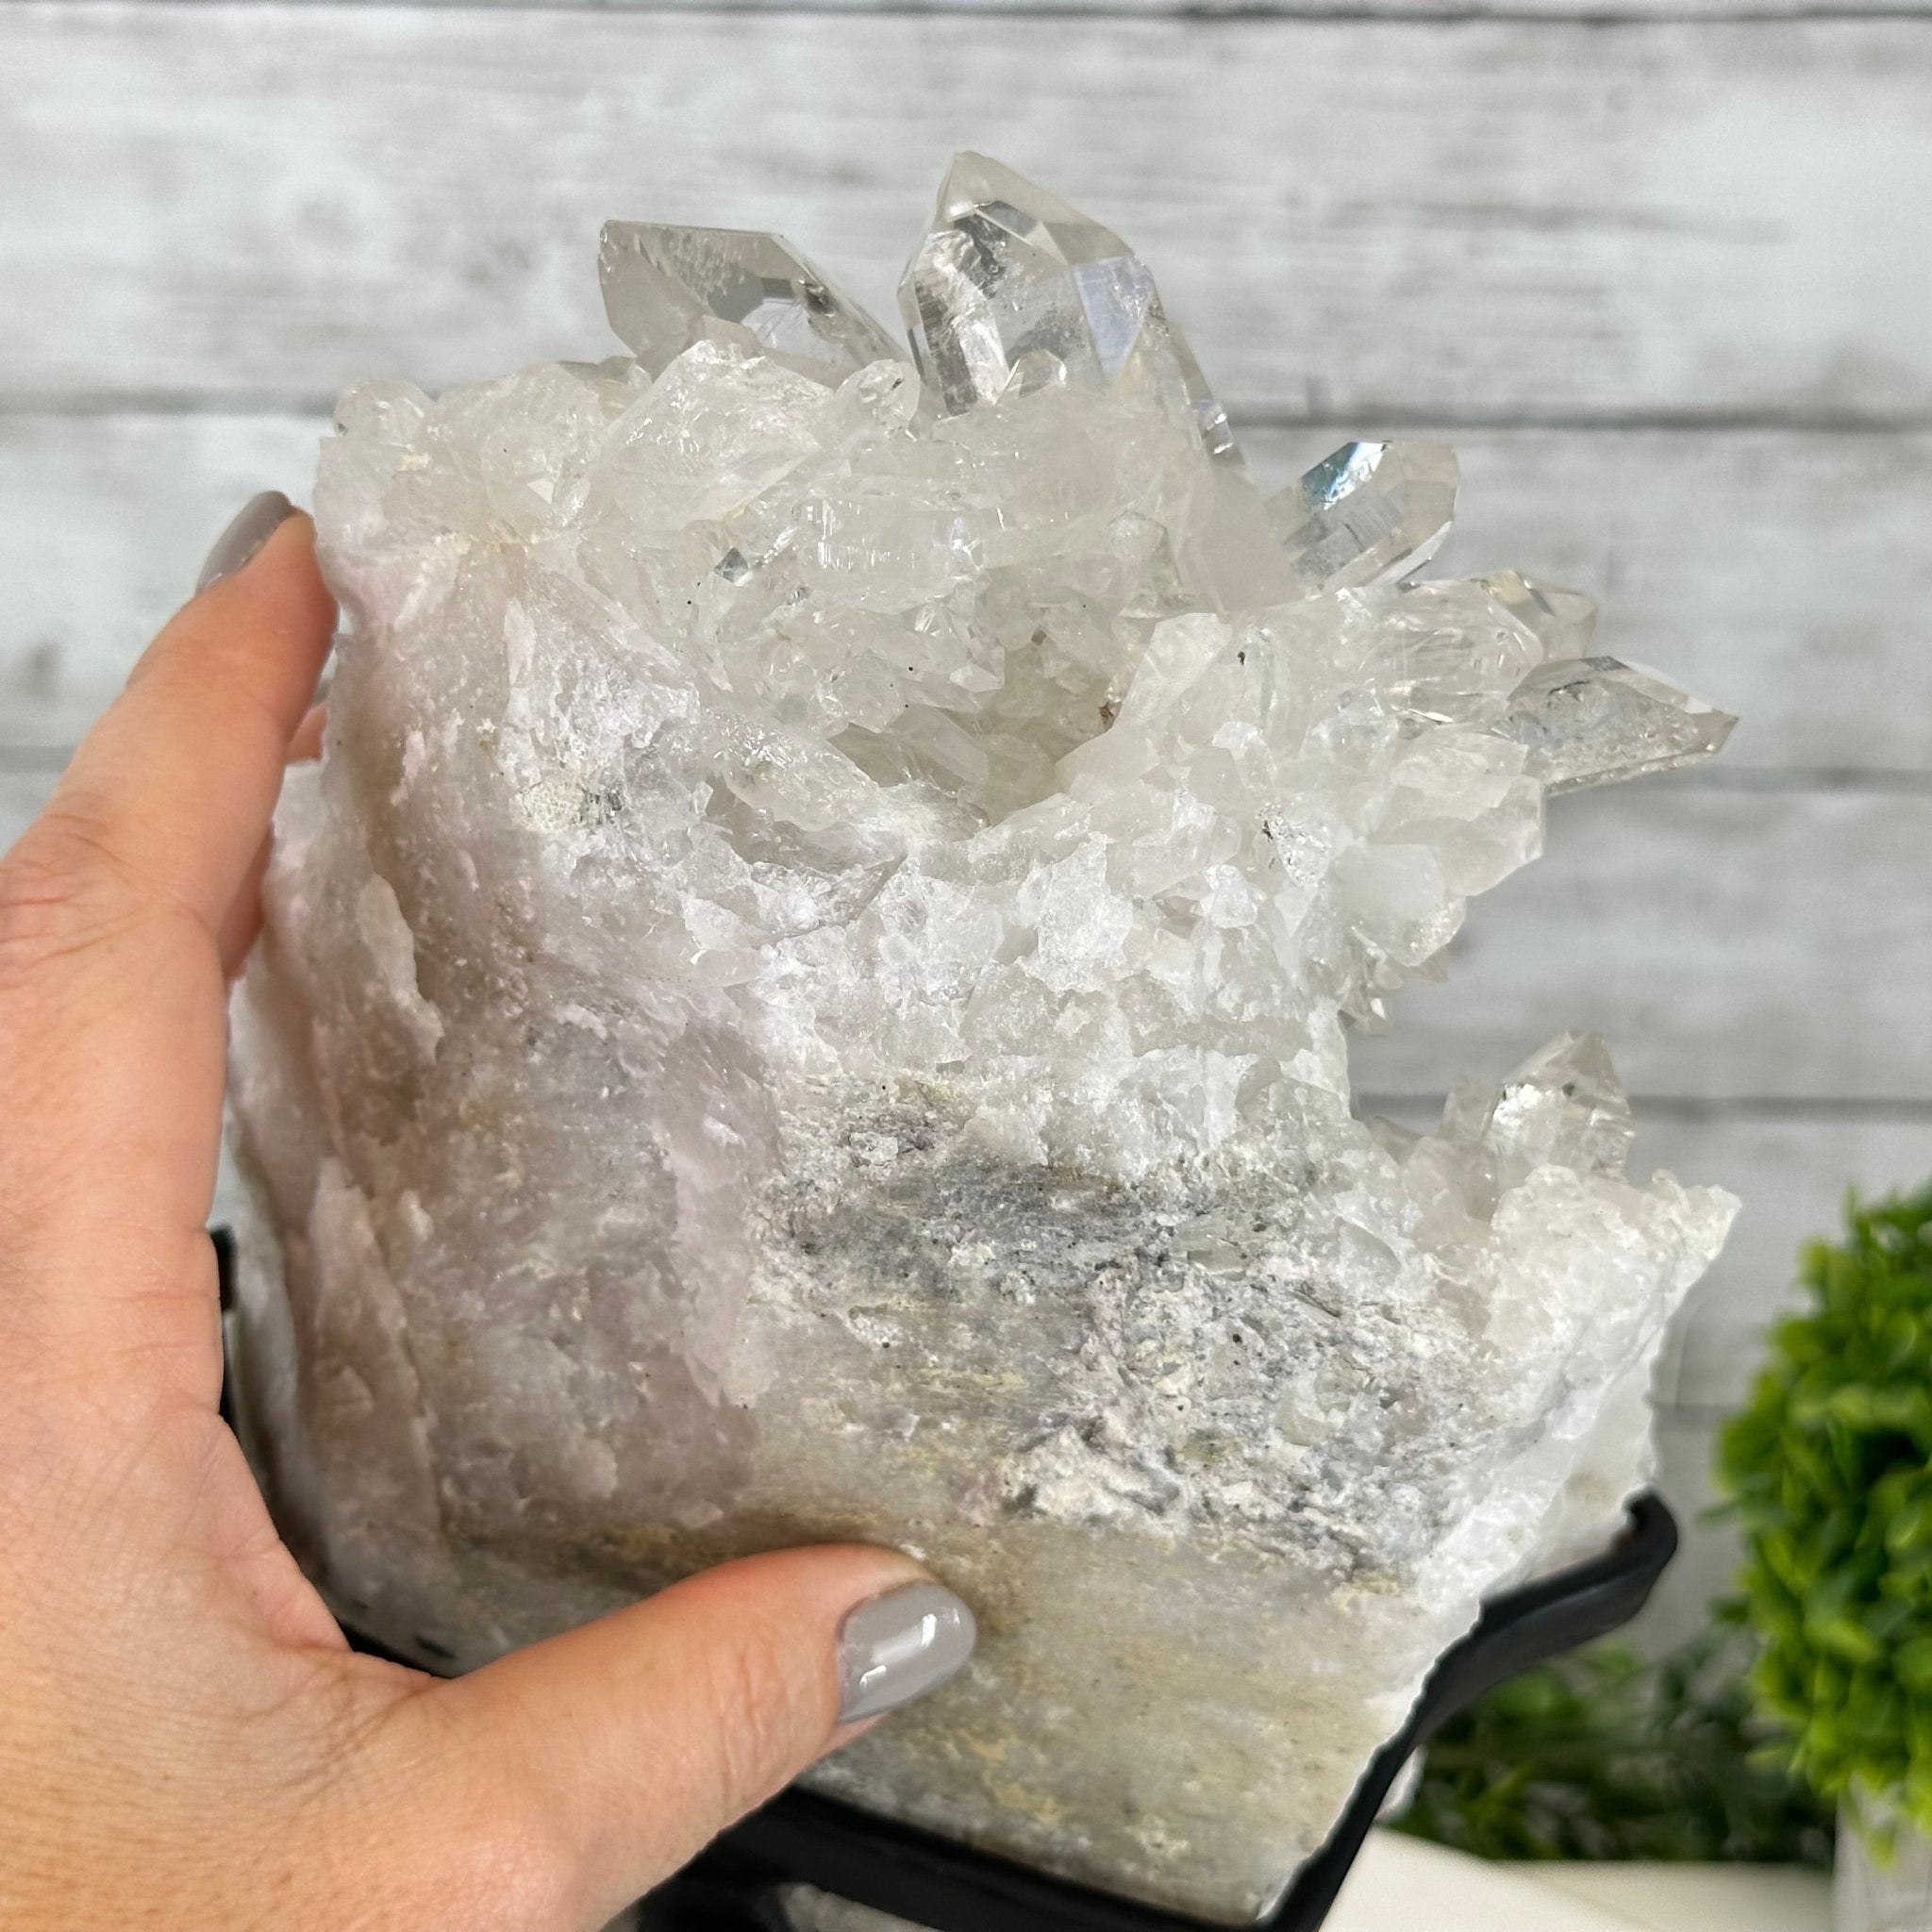 Super Quality Brazilian Clear Quartz Crystal Cluster, metal base, 10.1 lbs & 13.7" Tall #5495-0076 by Brazil Gems® - Brazil GemsBrazil GemsSuper Quality Brazilian Clear Quartz Crystal Cluster, metal base, 10.1 lbs & 13.7" Tall #5495-0076 by Brazil Gems®Clusters on Fixed Bases5495-0076